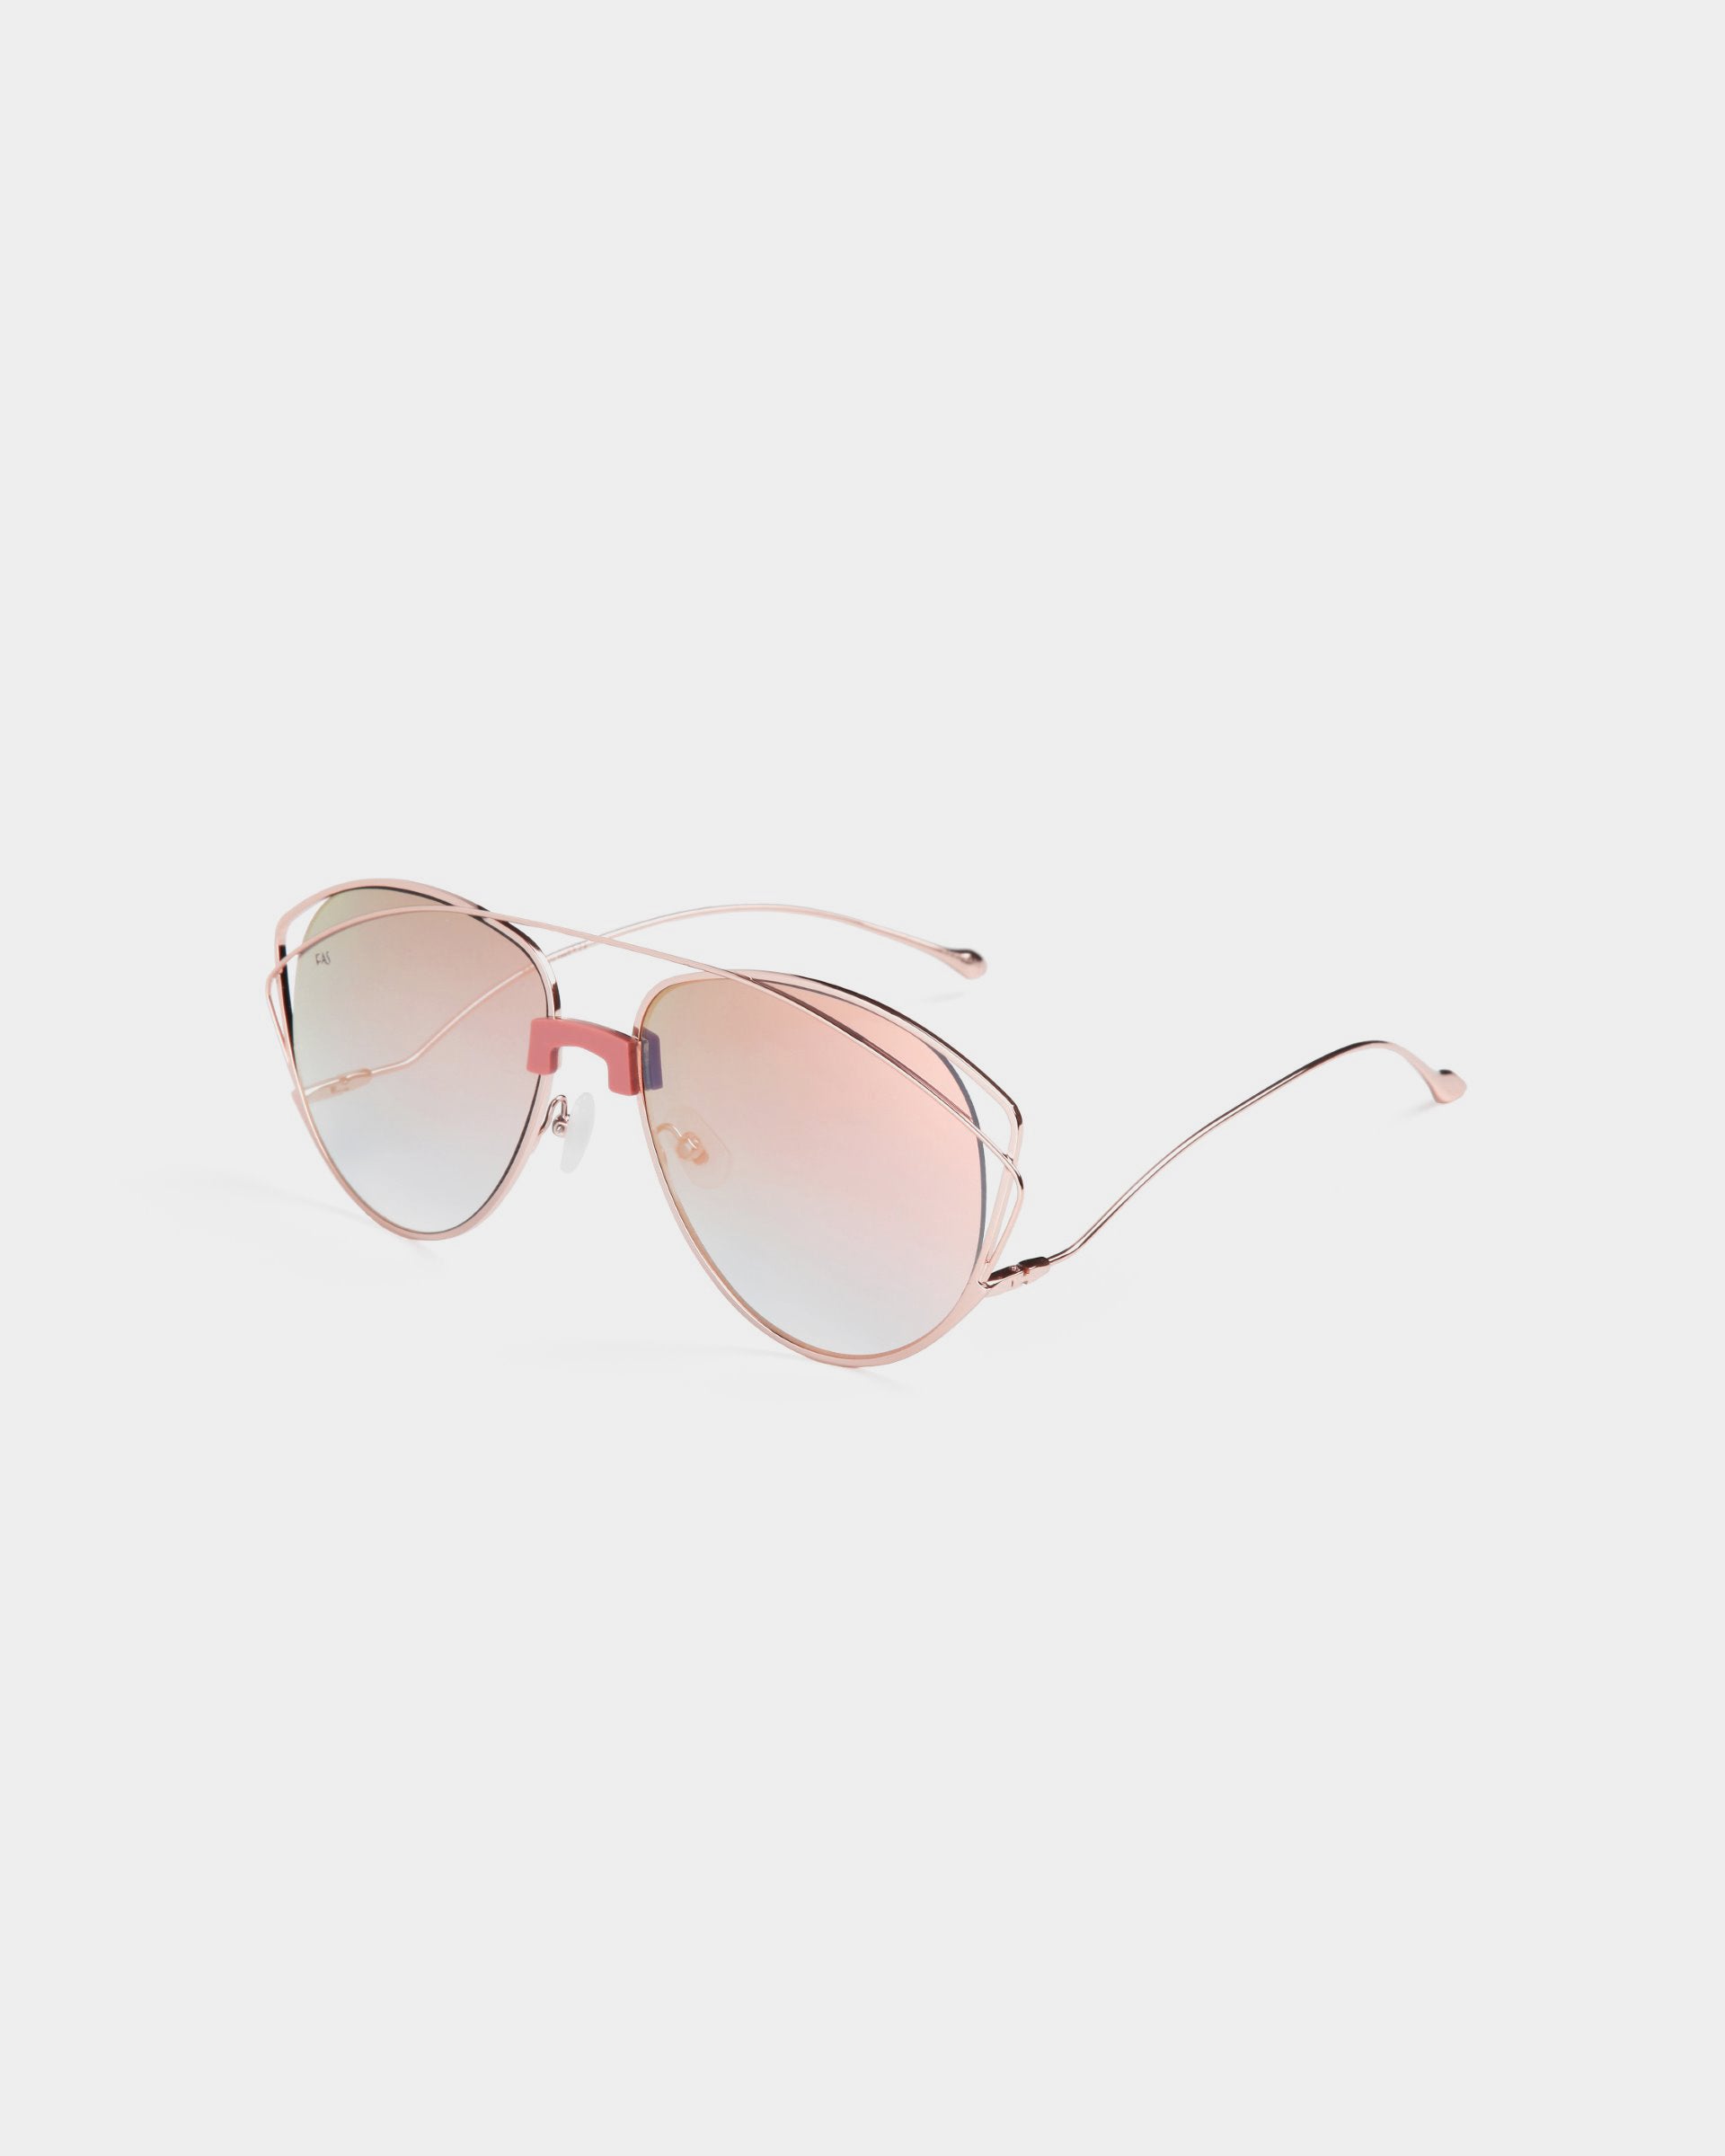 A pair of For Art&#39;s Sake® Dark Eyes aviator-style sunglasses with light pink-tinted lenses and rose gold stainless steel frames. The sunglasses have a sleek, minimalist design and thin arms, offering 100% UV protection while resting on a white background.